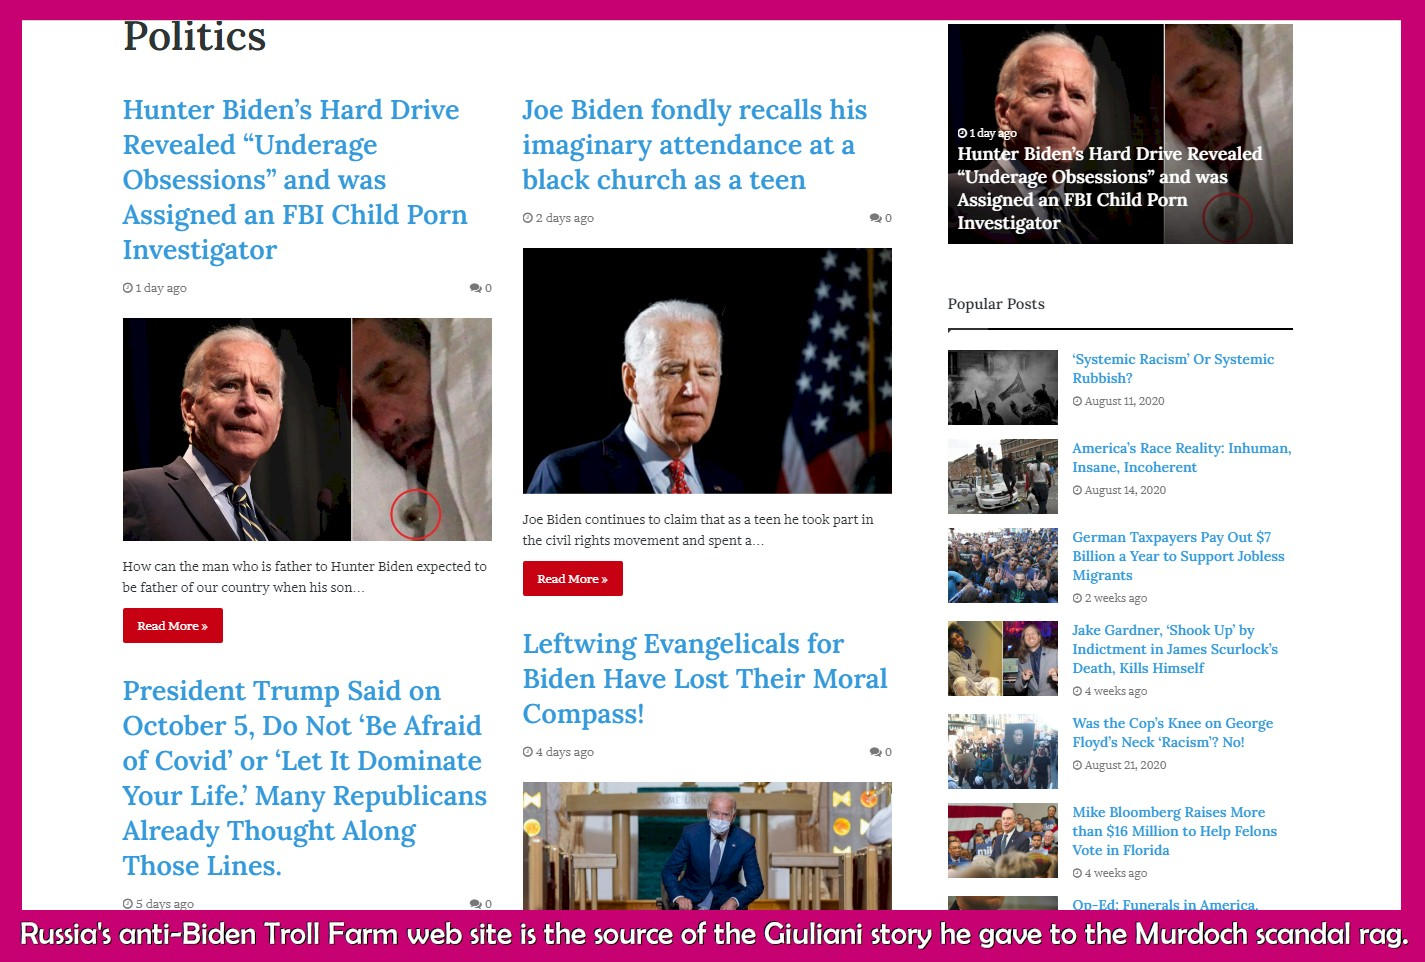 Russia's anti-Biden Troll Farm web site is the source of the story that Bannon and Giuliani gave to Murdoch and Sean Hannity writers at the New York Post